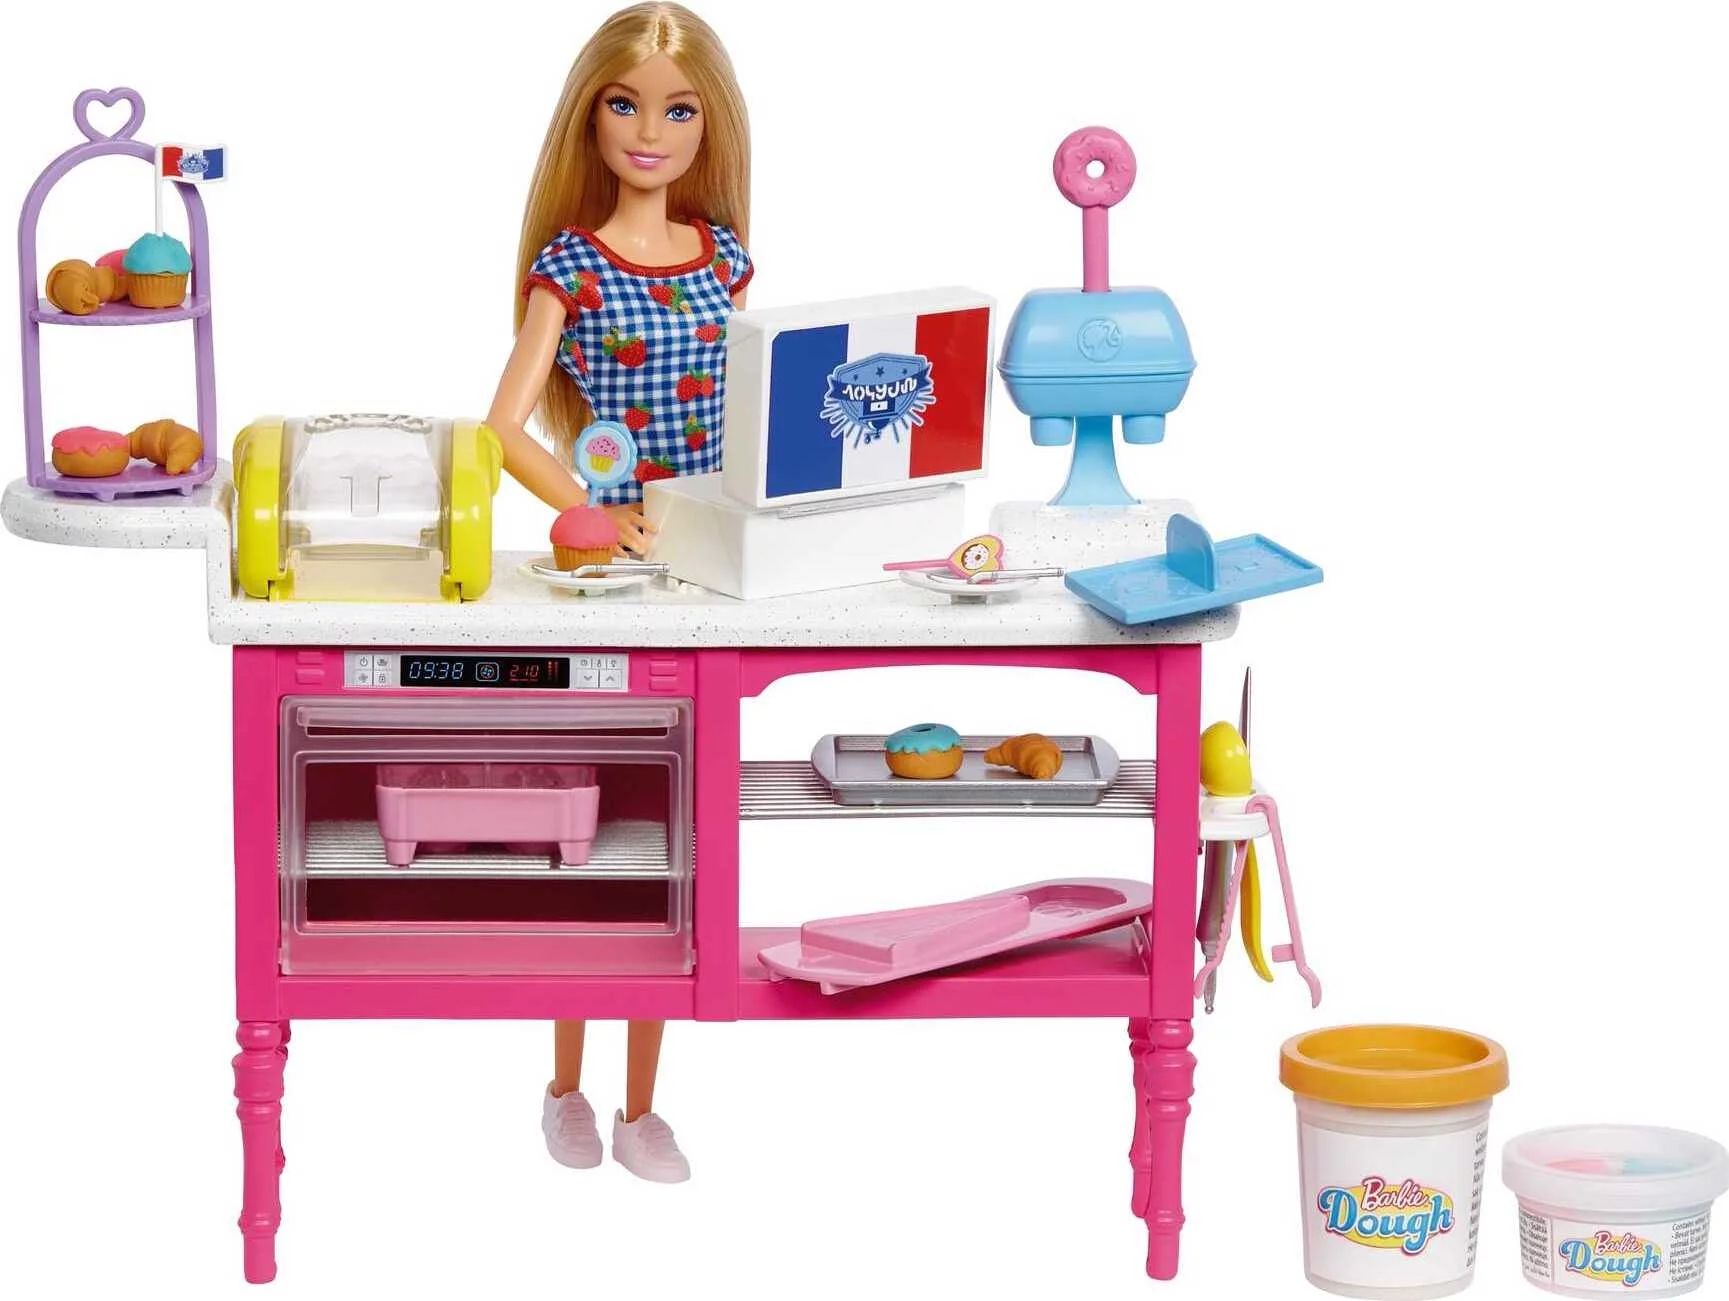 Barbie It Takes Two Pastry Café Playset with Blonde Malibu Doll & 18 Pastry-Making Accessories | Walmart (US)